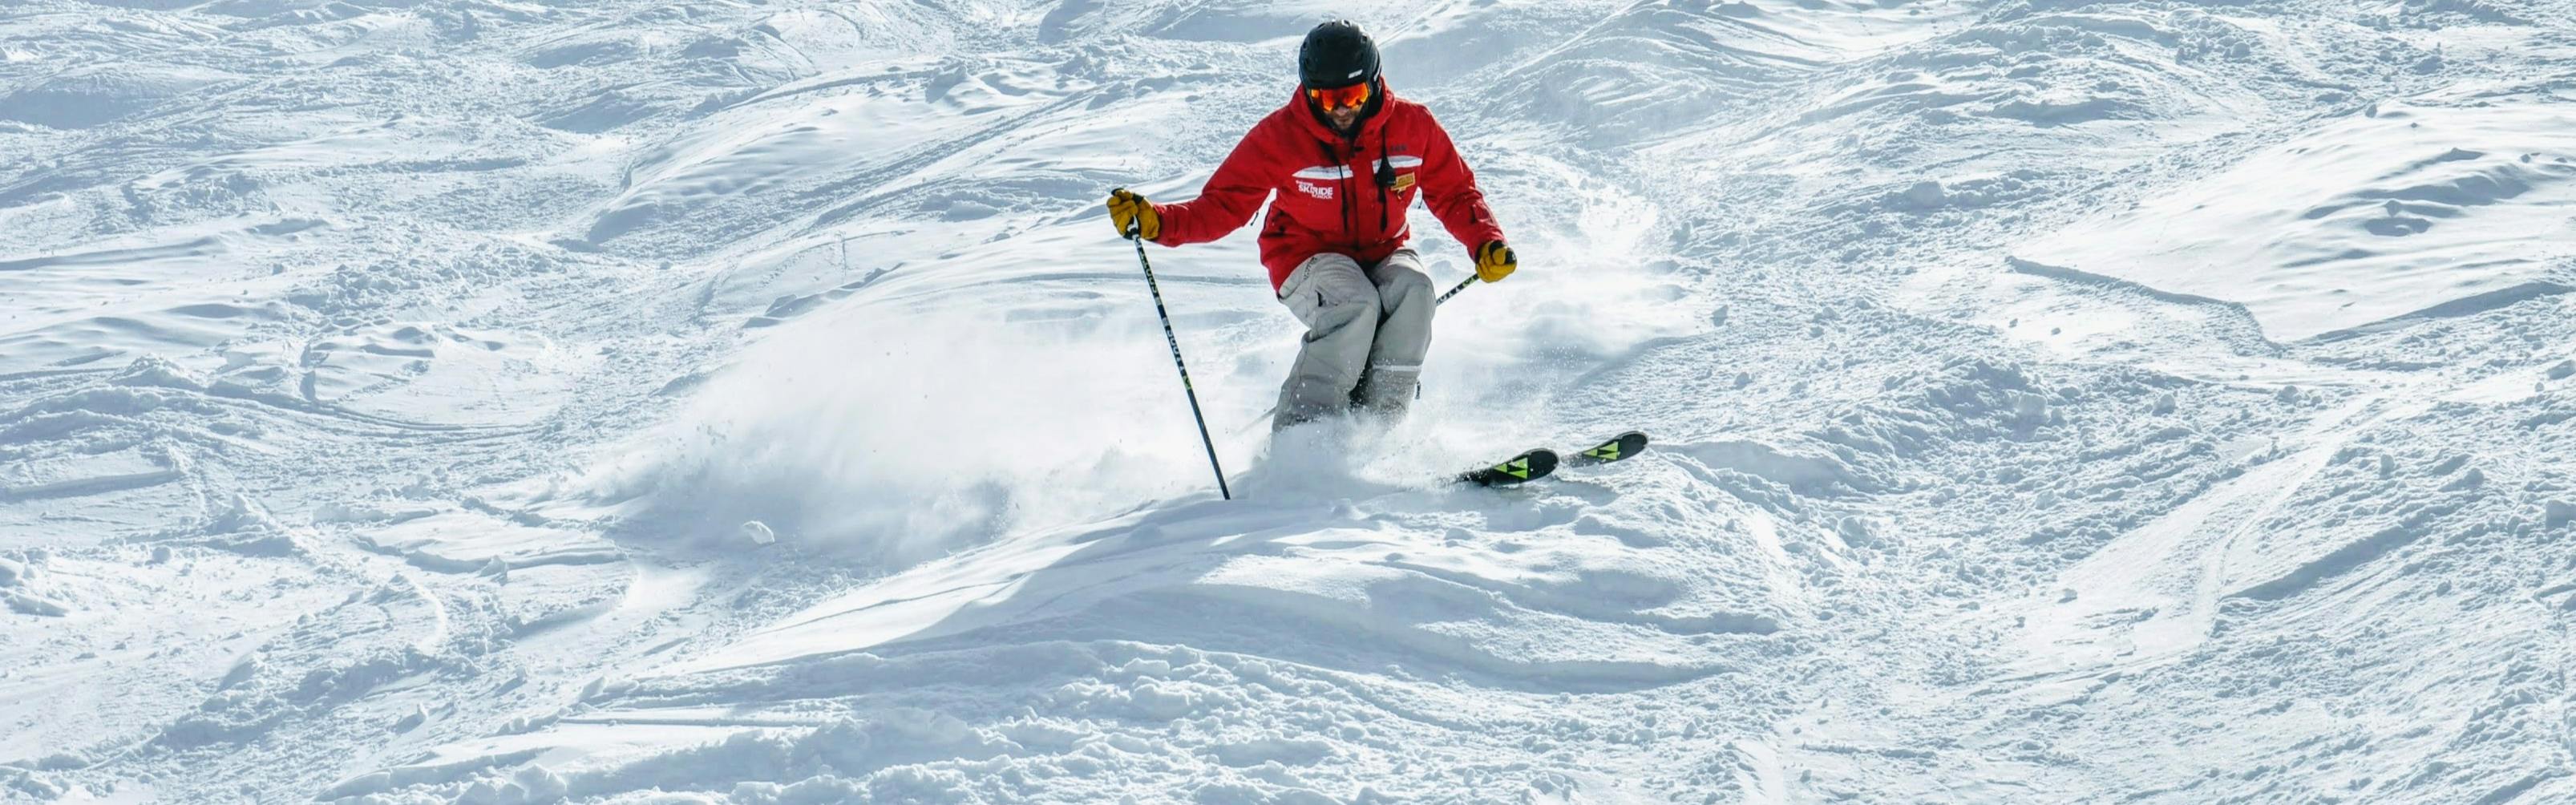 A skier in a bright red jacket skiing down moguls.